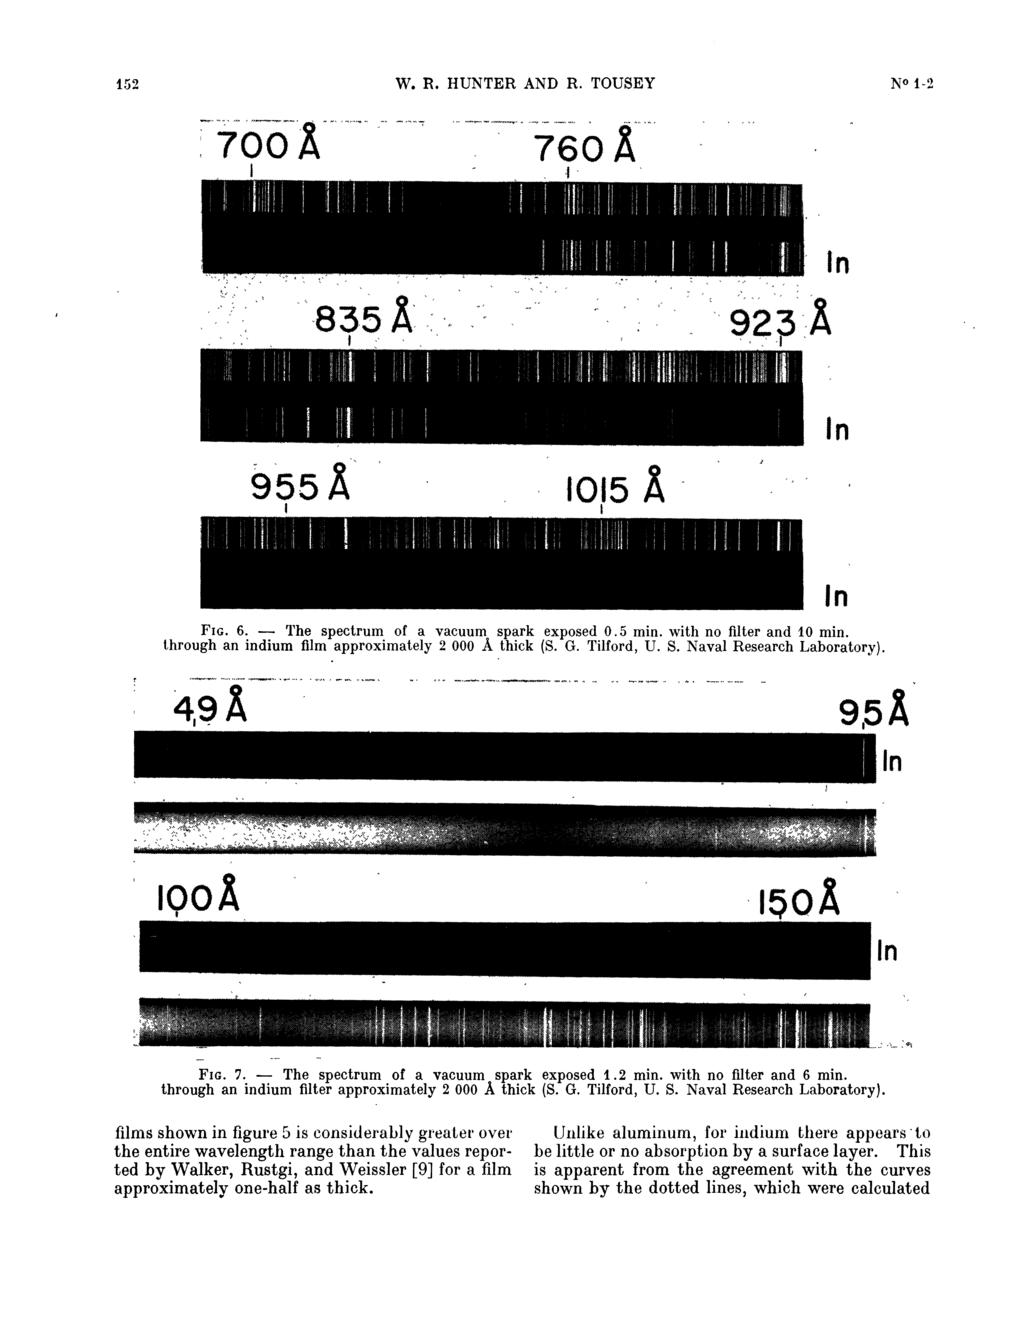 152 Fic. 6. spectrum of a vacuum spark exposed 0.5 min. with no filter and 10 min. through an indium film approximately 2 000 A thick (S. G. Tilford, U. S. Naval Research Laboratory). FIG. 7.